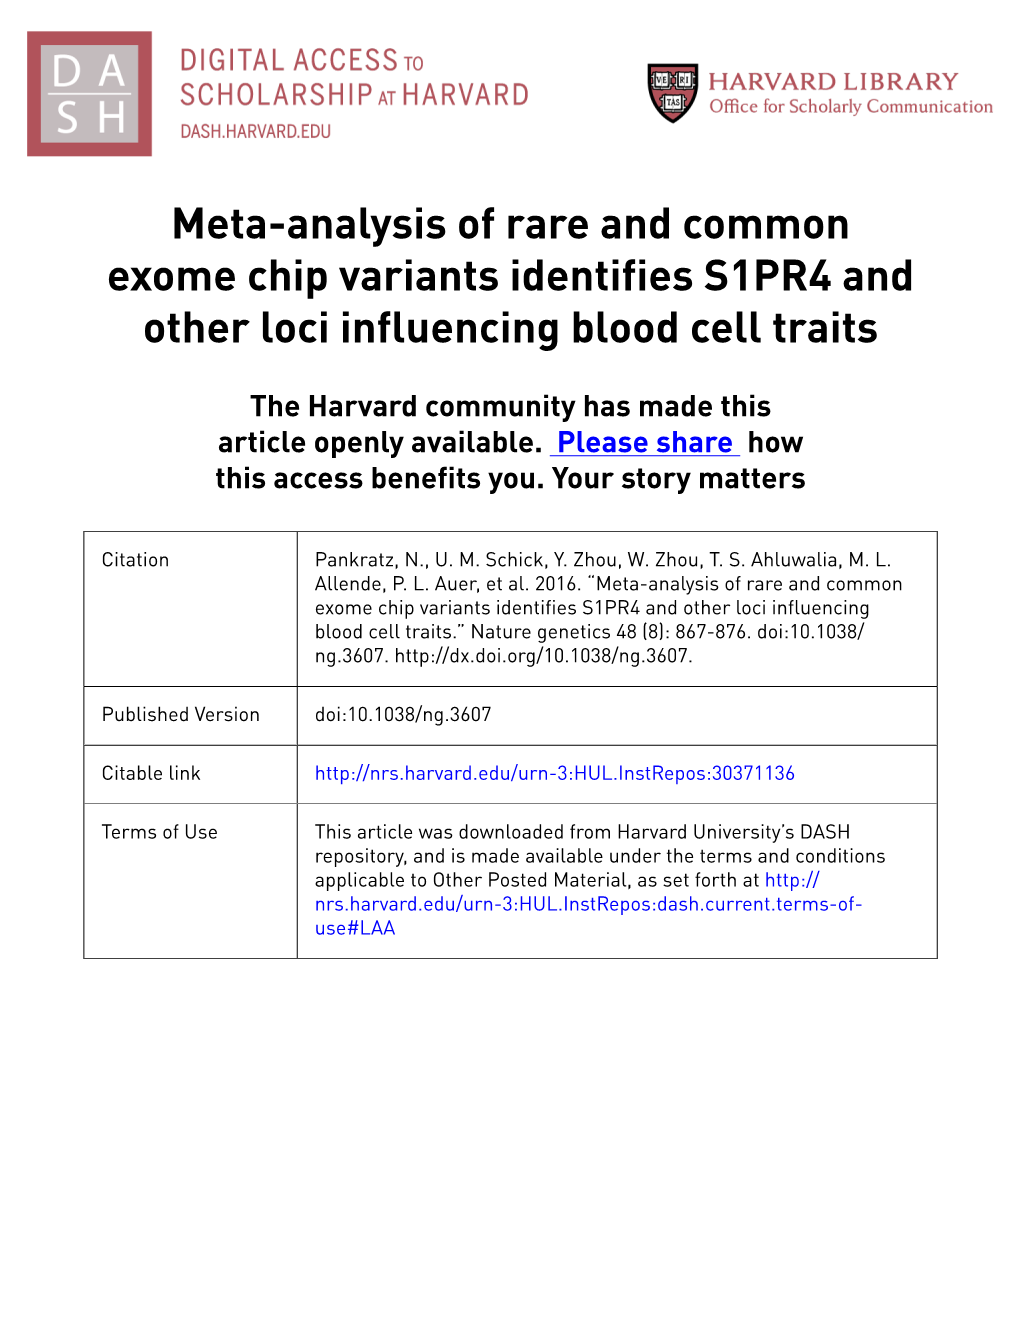 Meta-Analysis of Rare and Common Exome Chip Variants Identifies S1PR4 and Other Loci Influencing Blood Cell Traits